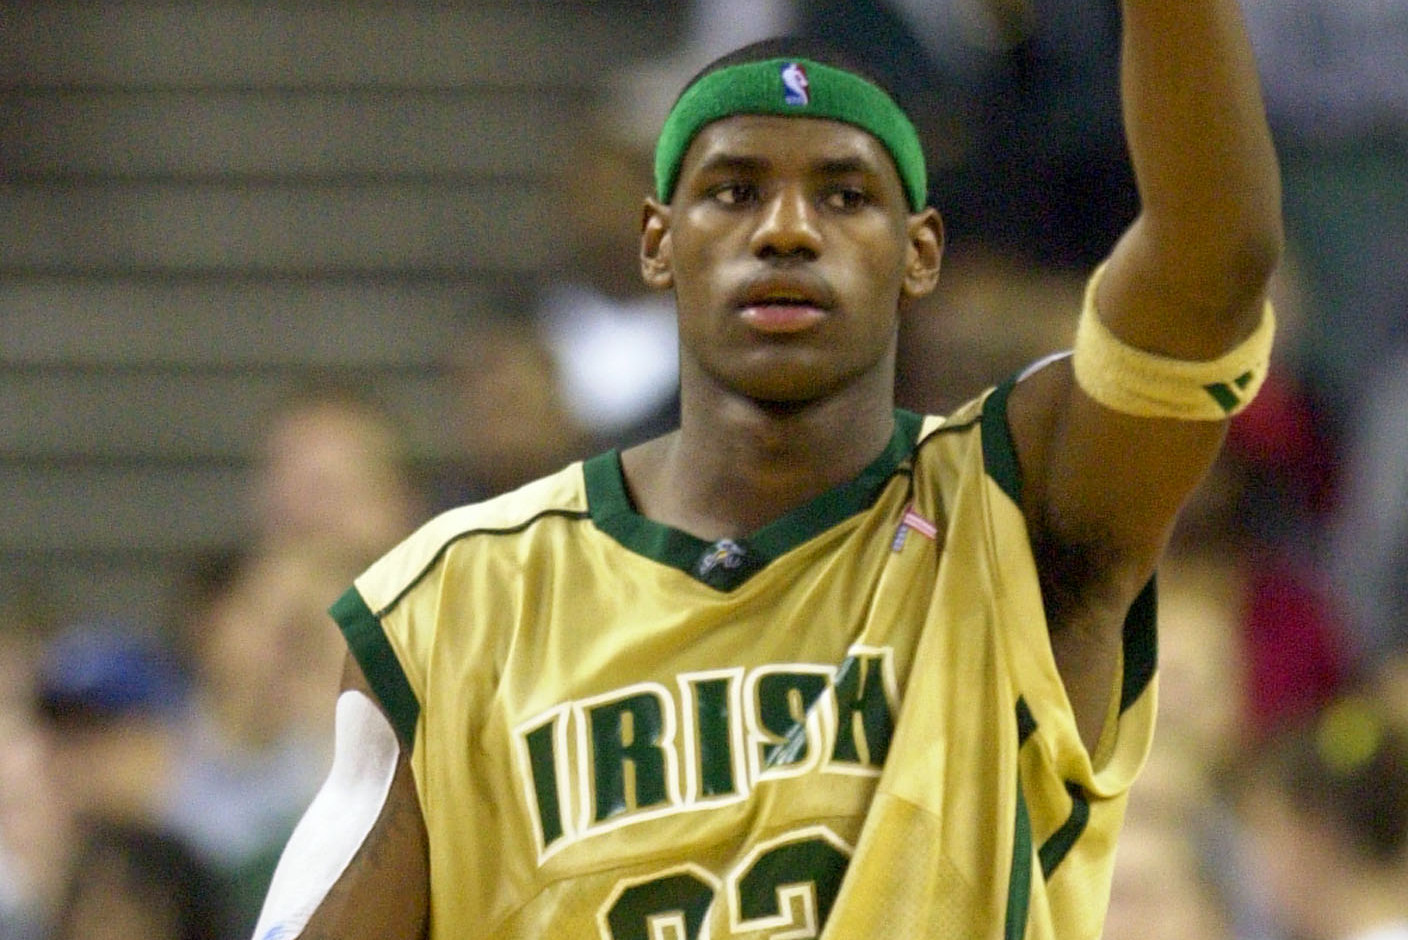 LeBron James' high school jersey sells for new world record at auction 